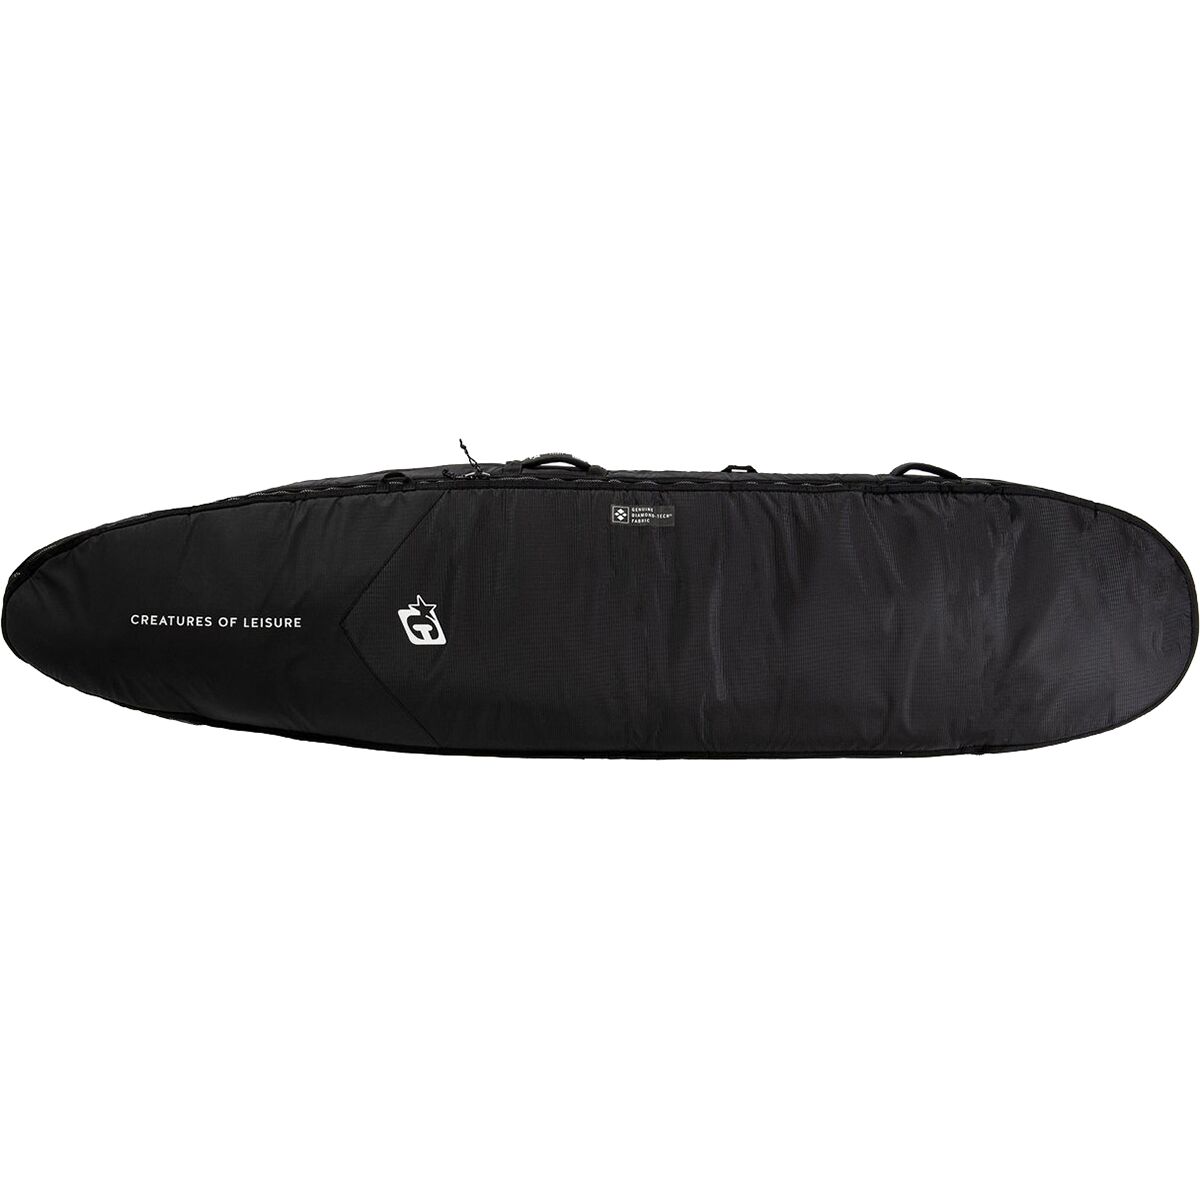 Creatures of Leisure Longboard Day Use DT 2.0 Surfboard Bag